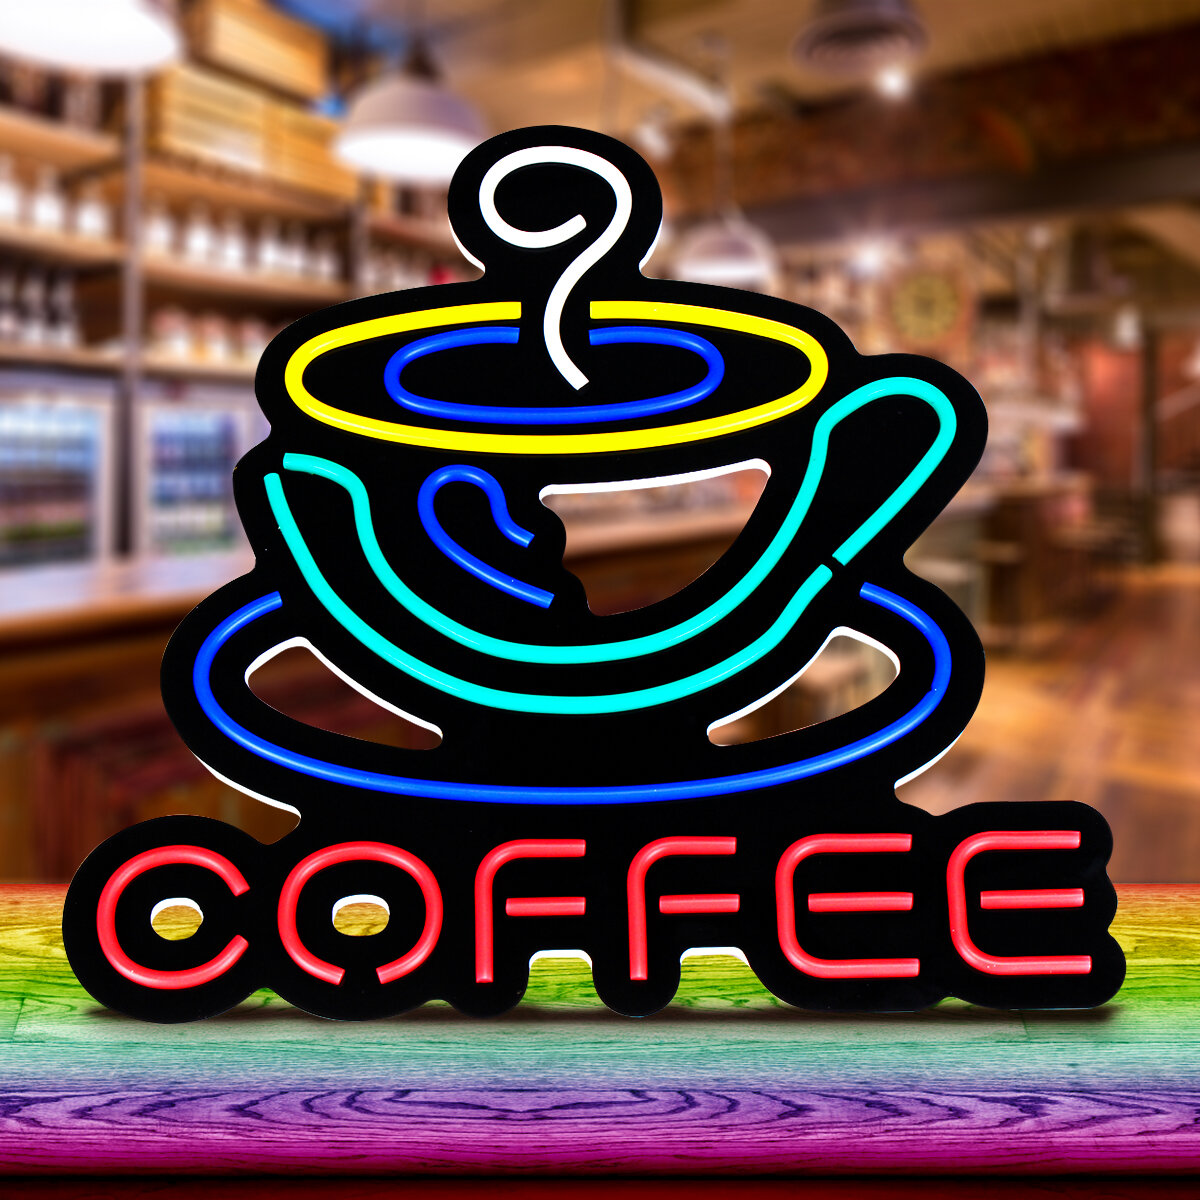 

COFFEE LED Neon Sign Light Hanging Party Store Visual Artwork Lamp Wall Decor AC110-240V